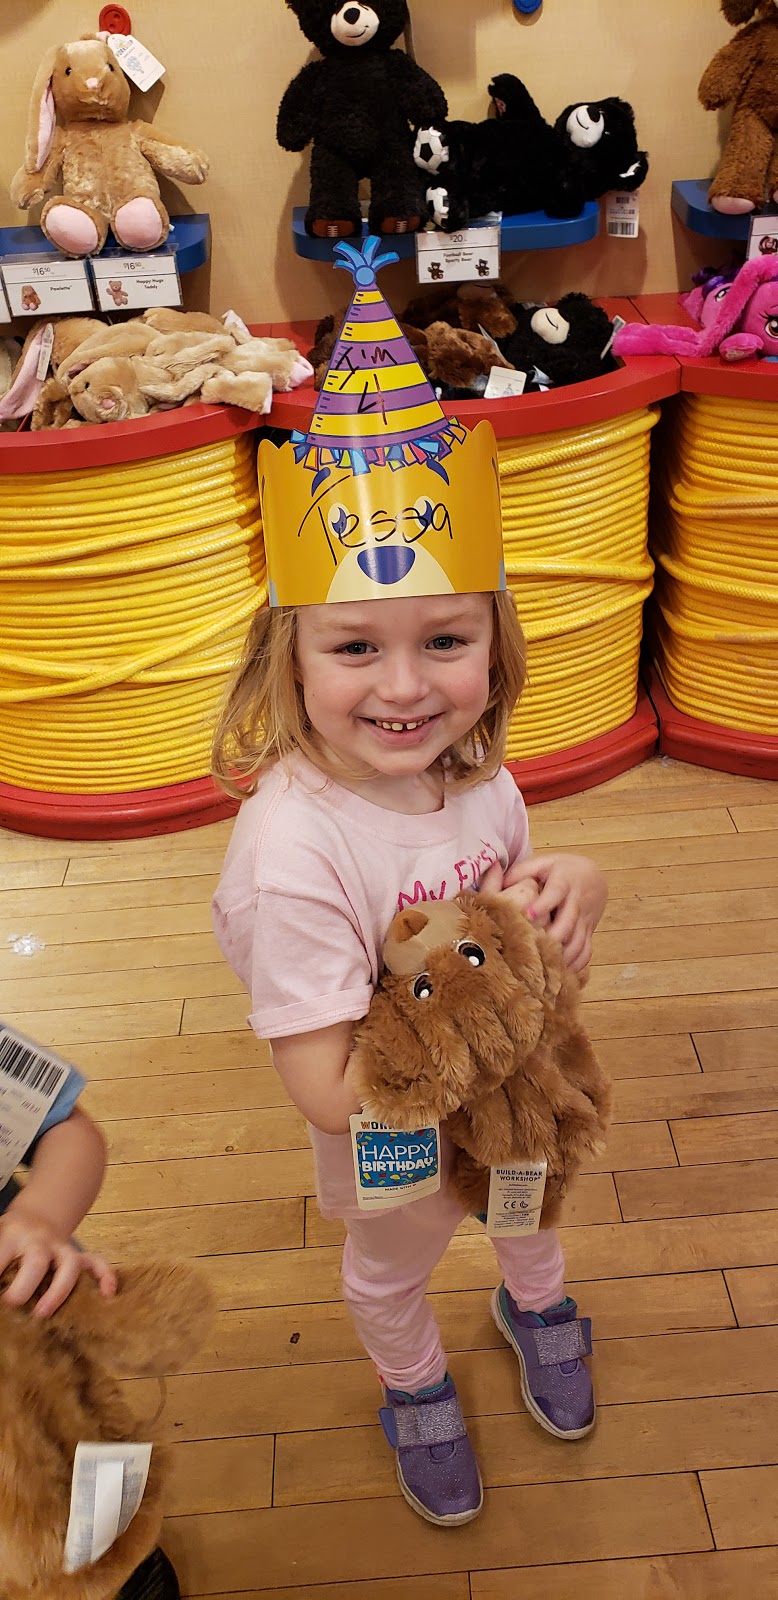 Build-A-Bear Workshop | 2500 W Moreland Rd Suite 2029, Willow Grove, PA 19090 | Phone: (215) 657-8633